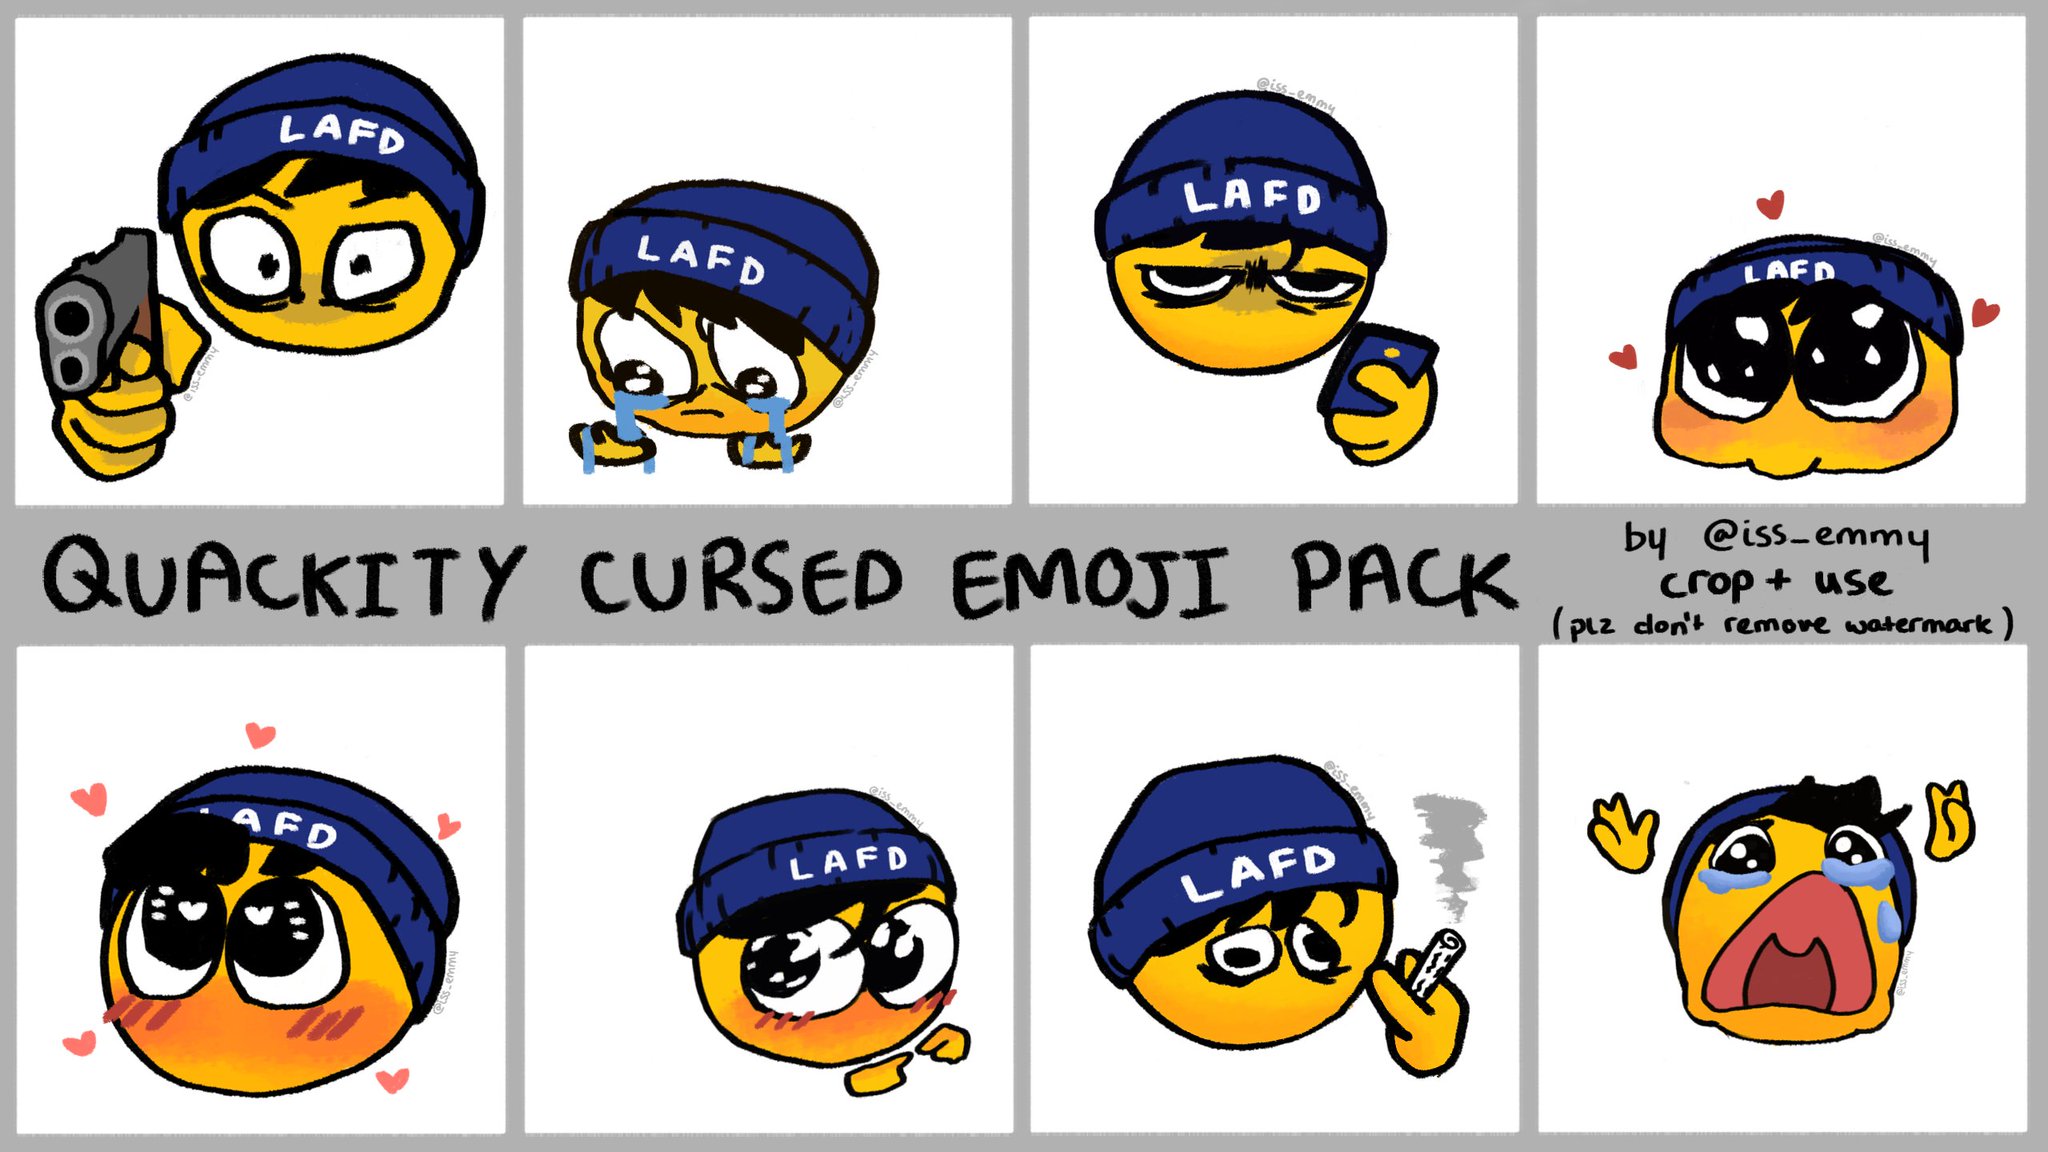 emmy :) on X: I saw some techno themed cursed emojis so I made some  quackity themed, they're so stupid i love them. feel free to crop and use  them :) when